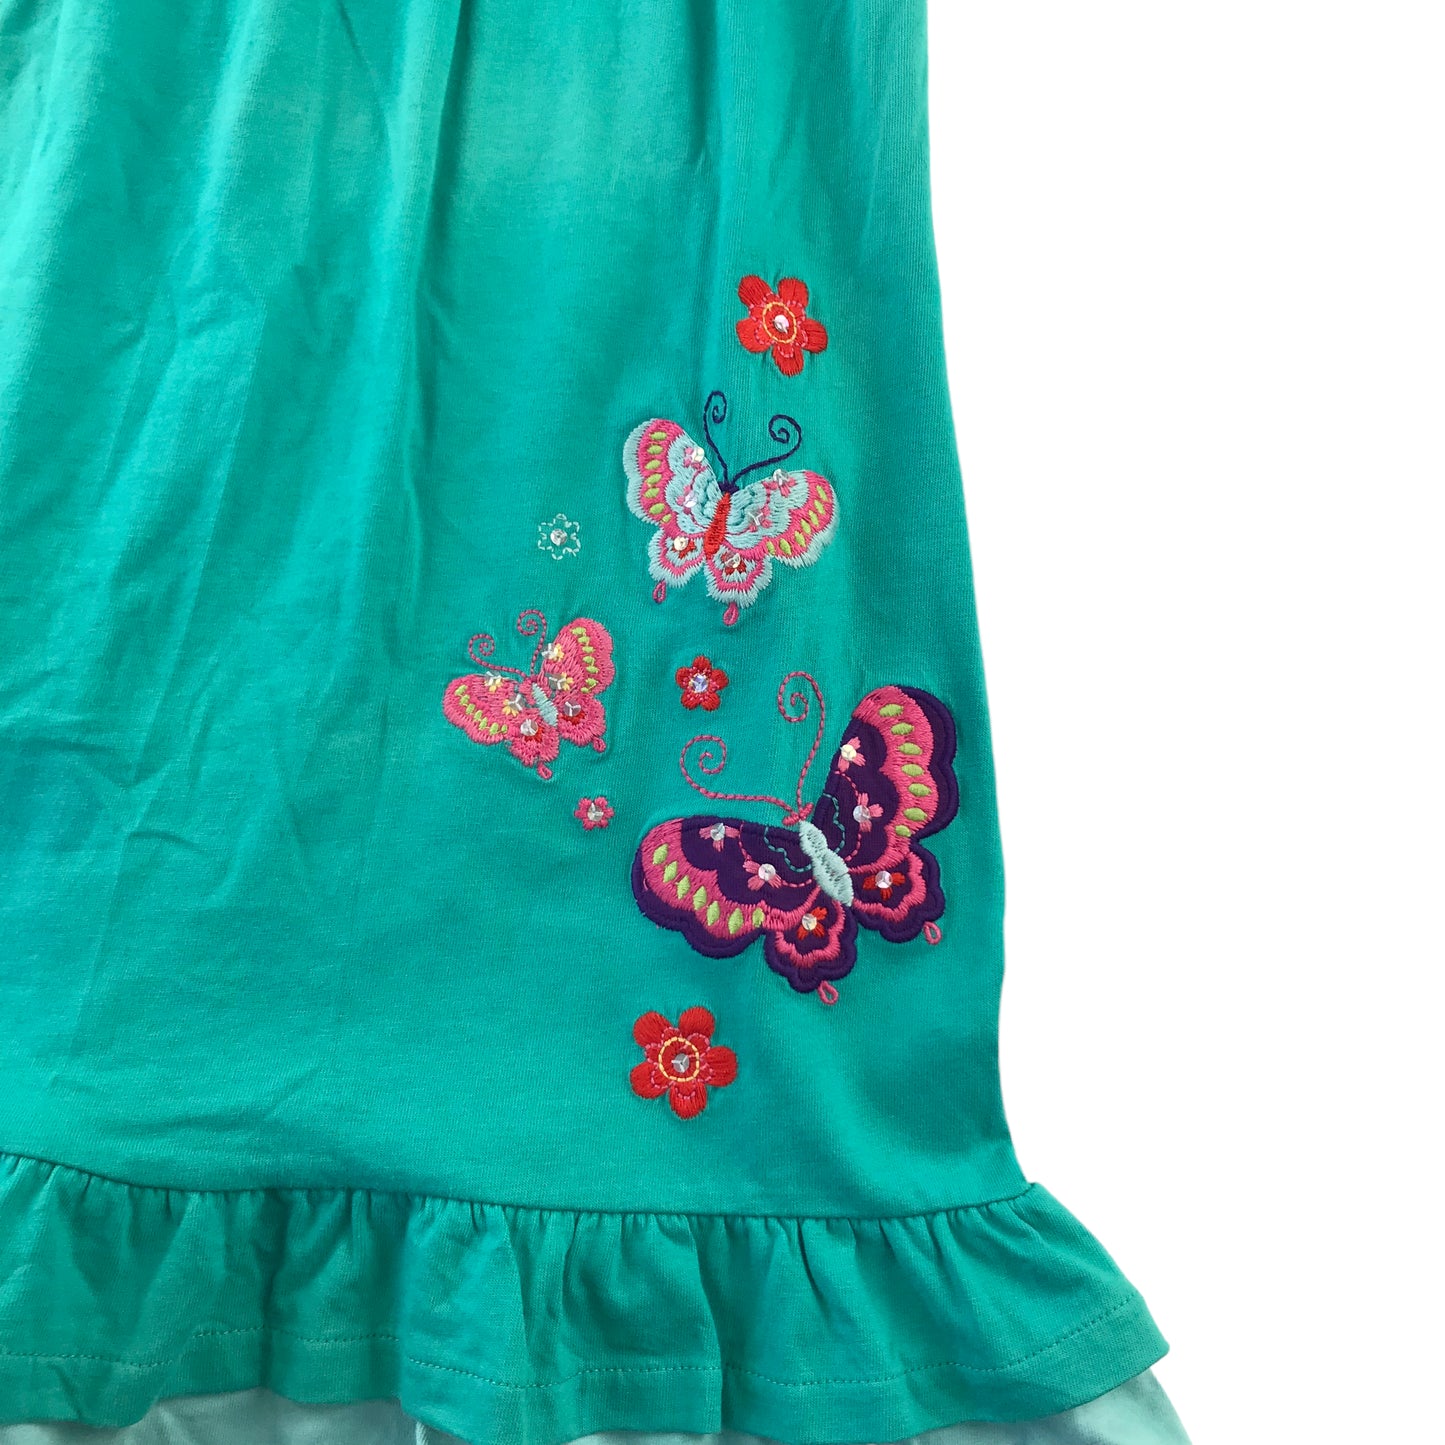 Debenhams Dress Age 8 Turquoise Floral and Butterfly Embroidery Cotton